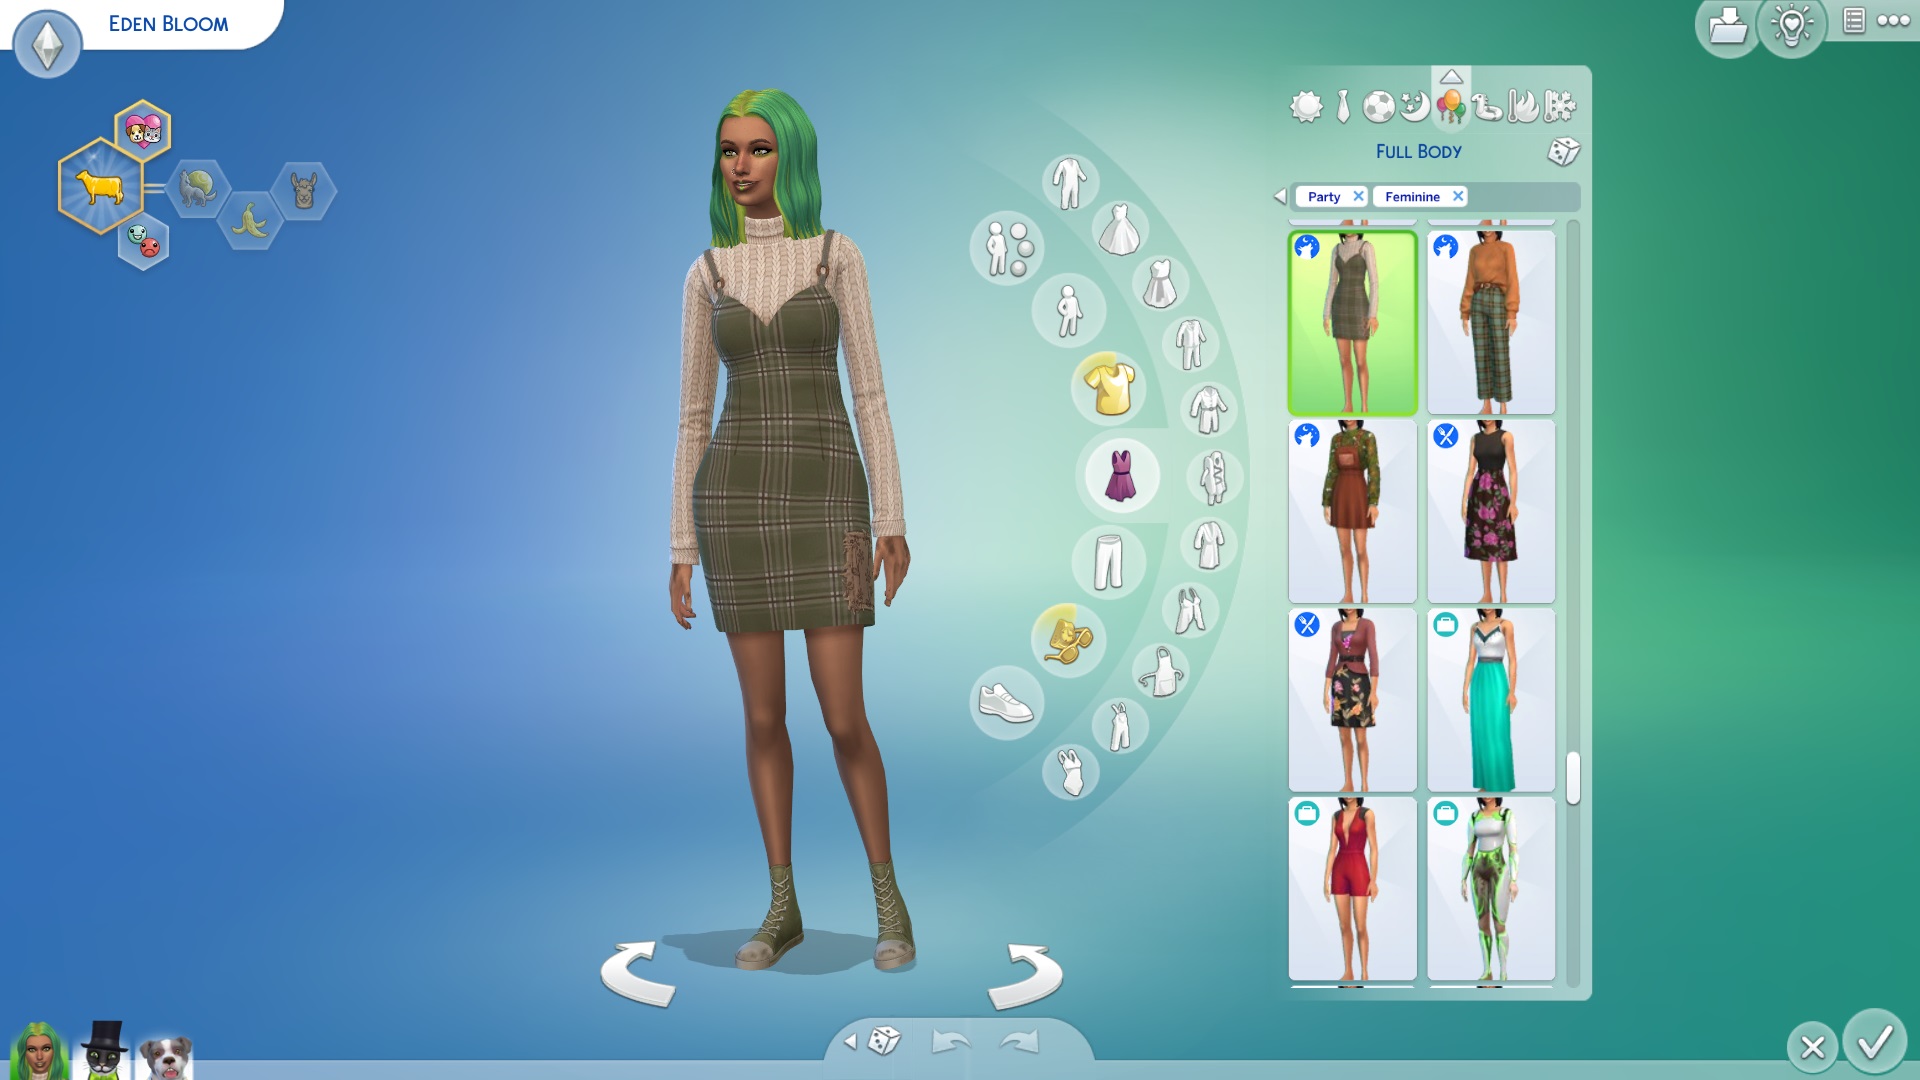 How to Use The Sims 4 CAS Full Edit Mode Cheat (CAS Cheat)